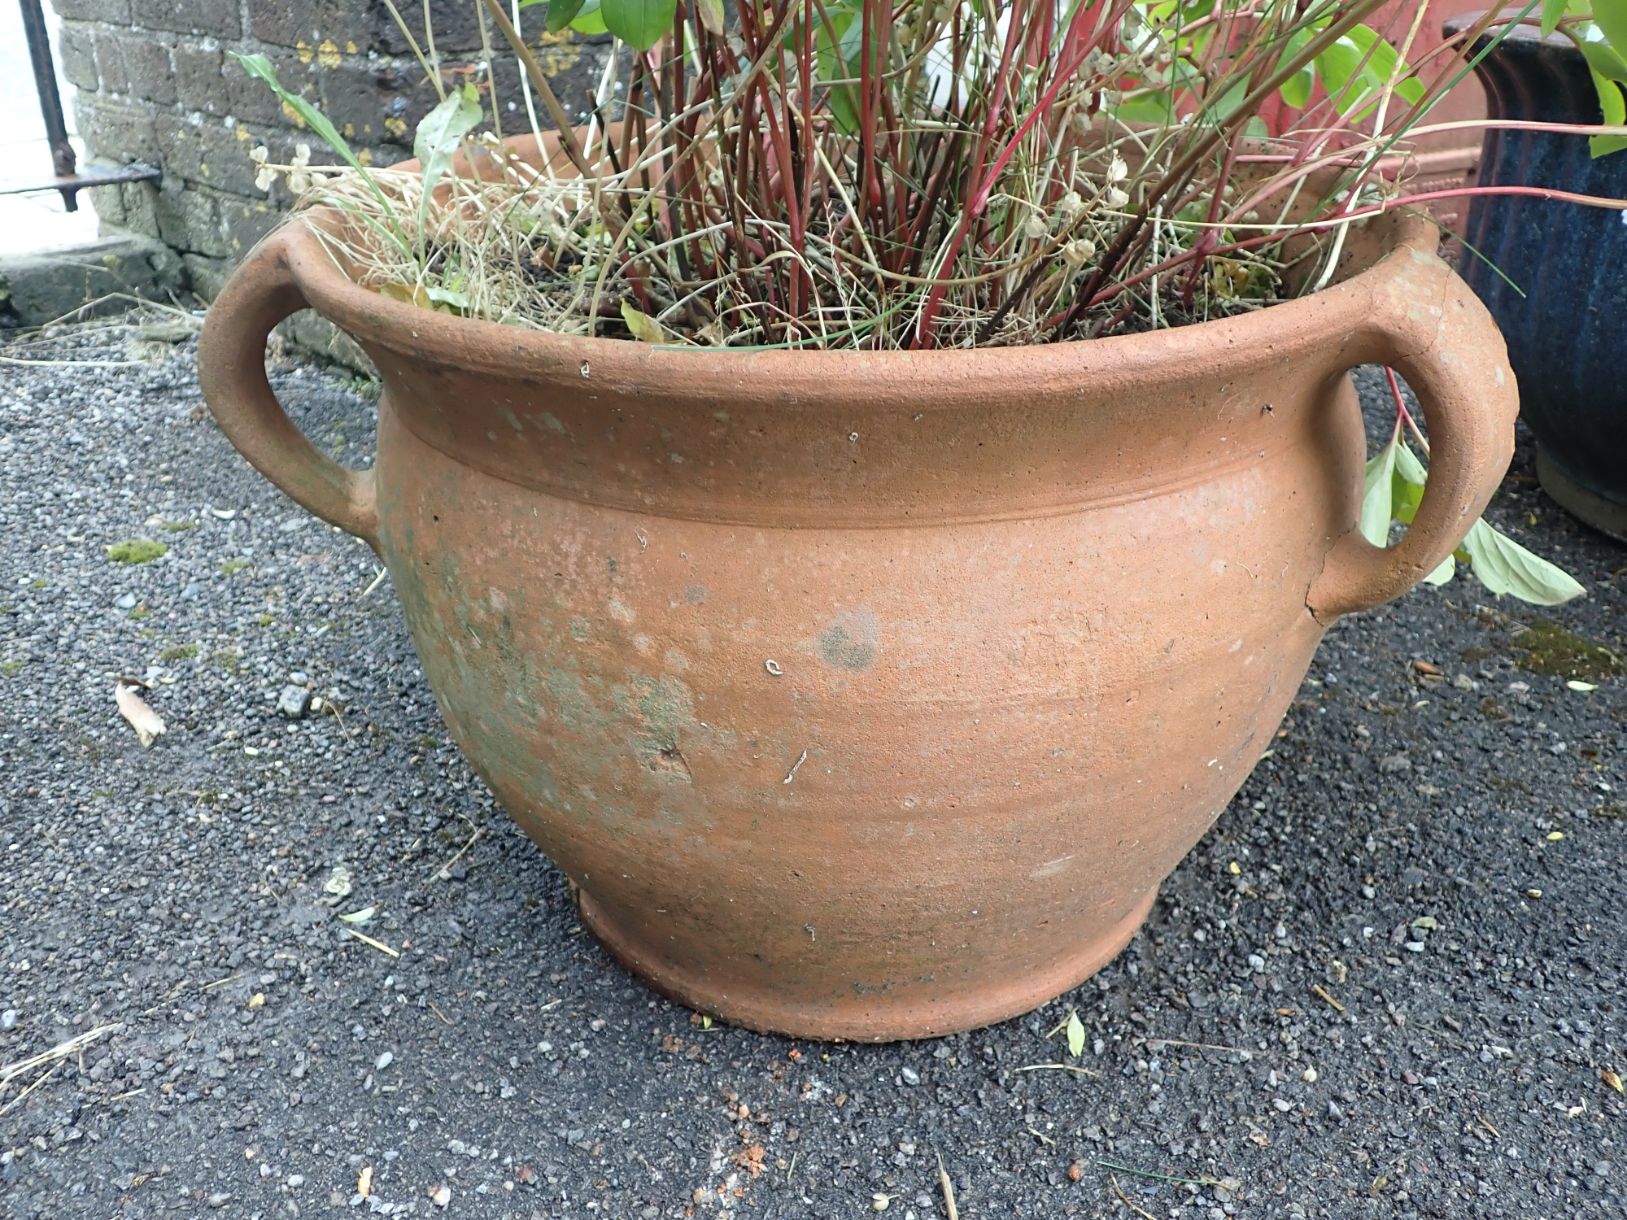 AN ARTS AND CRAFTS STYLE TERRACOTTA GARDEN PLANTER - Image 2 of 2